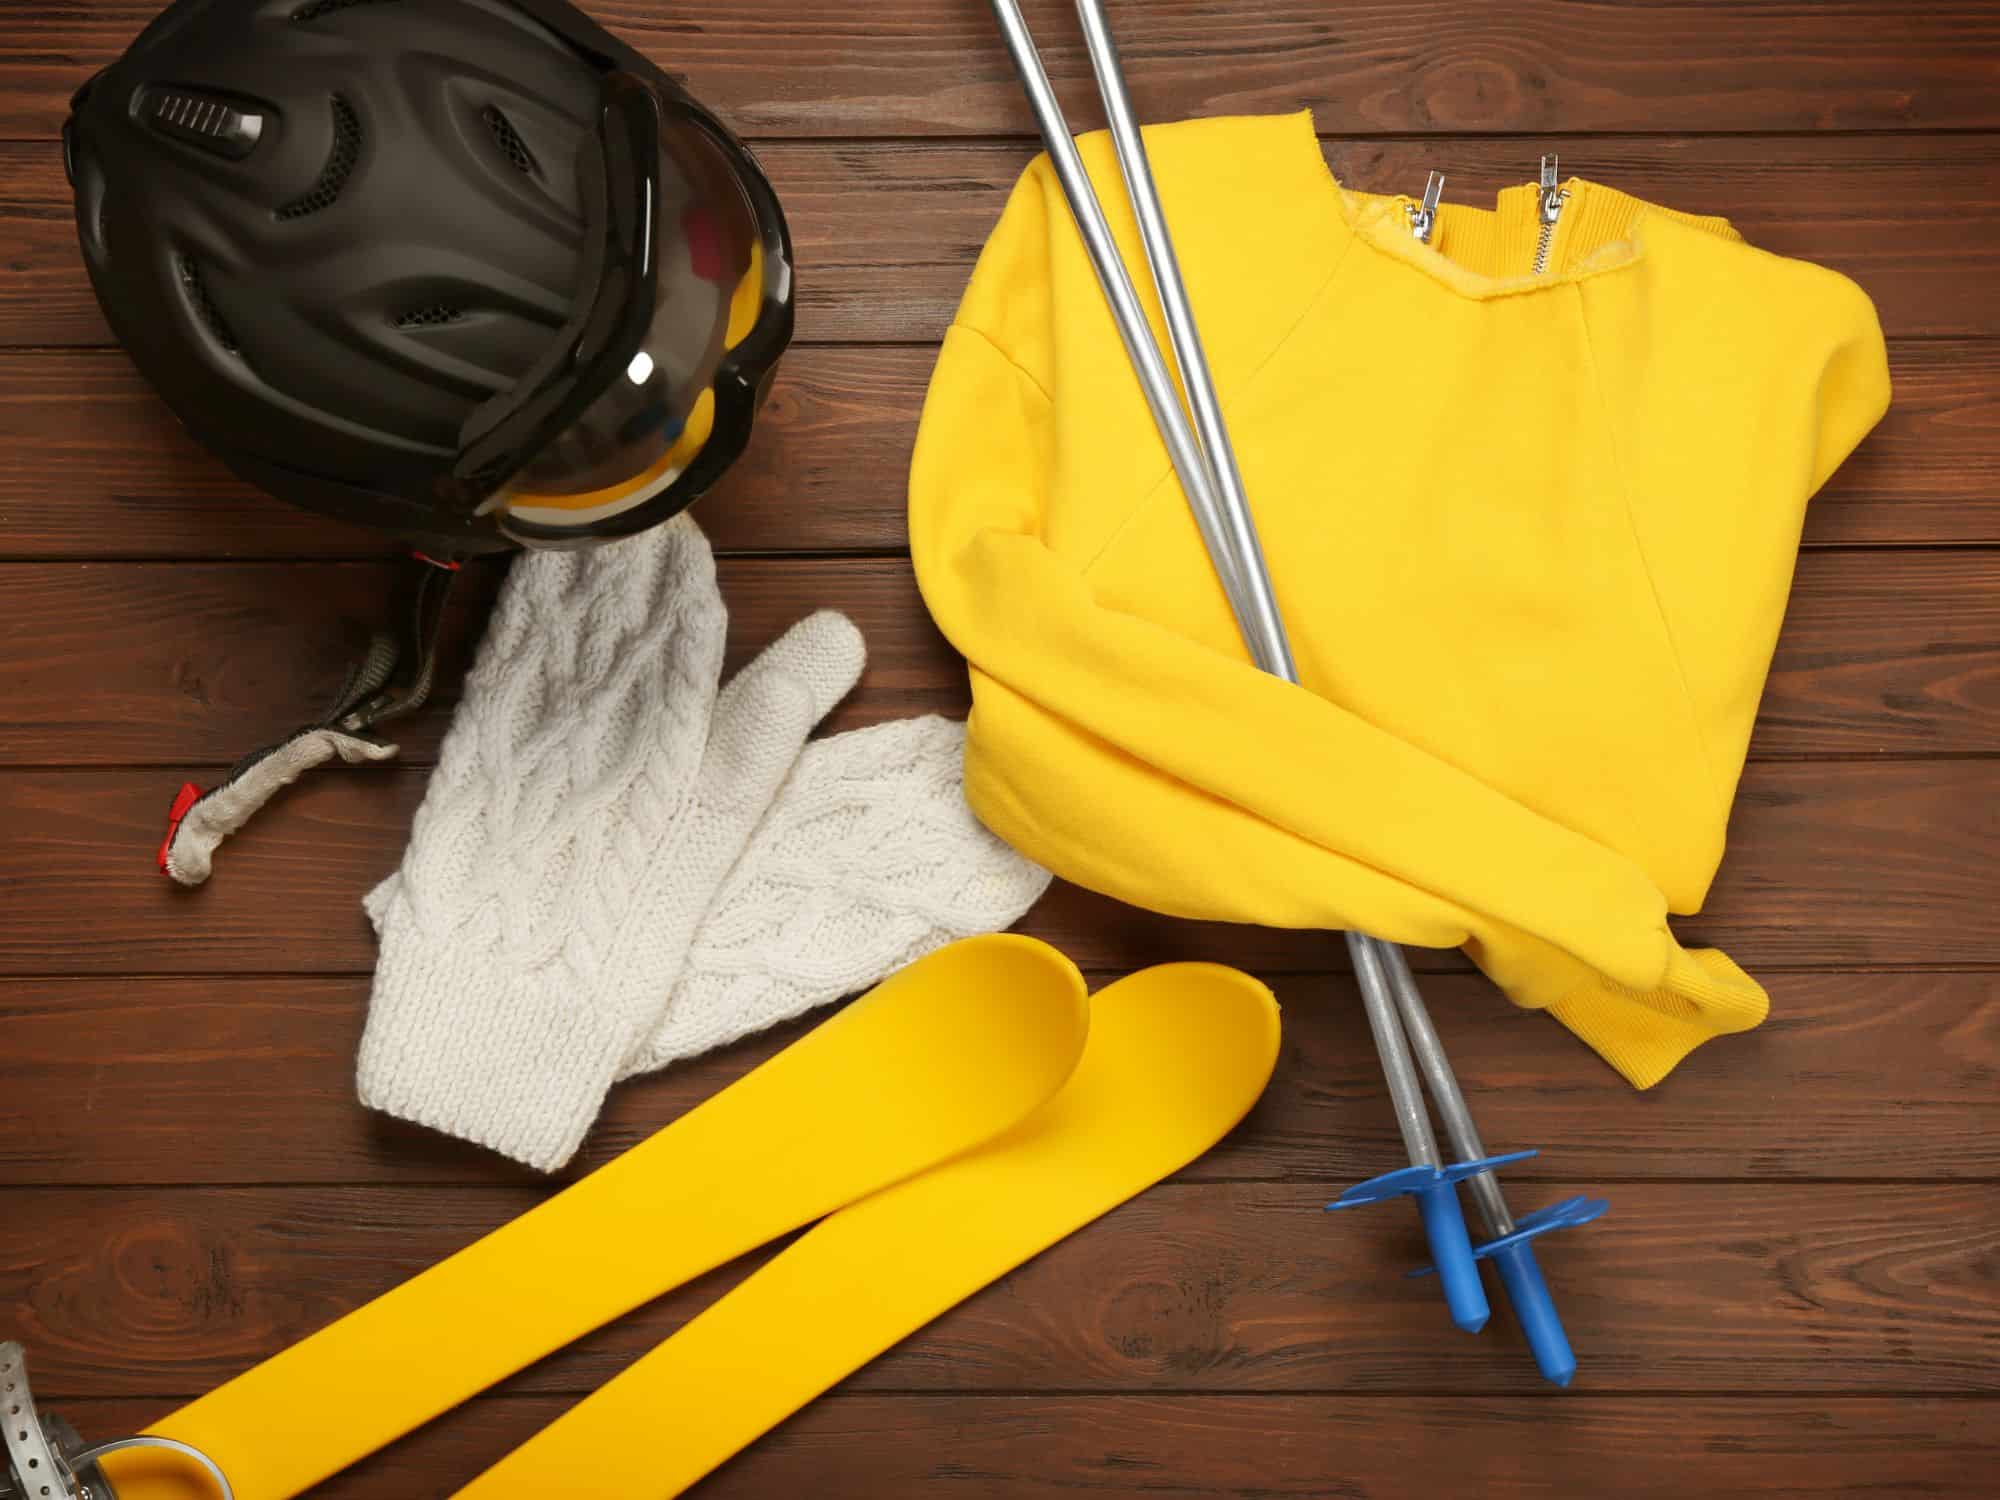 What to pack for a ski trip - ski trip packing list for women